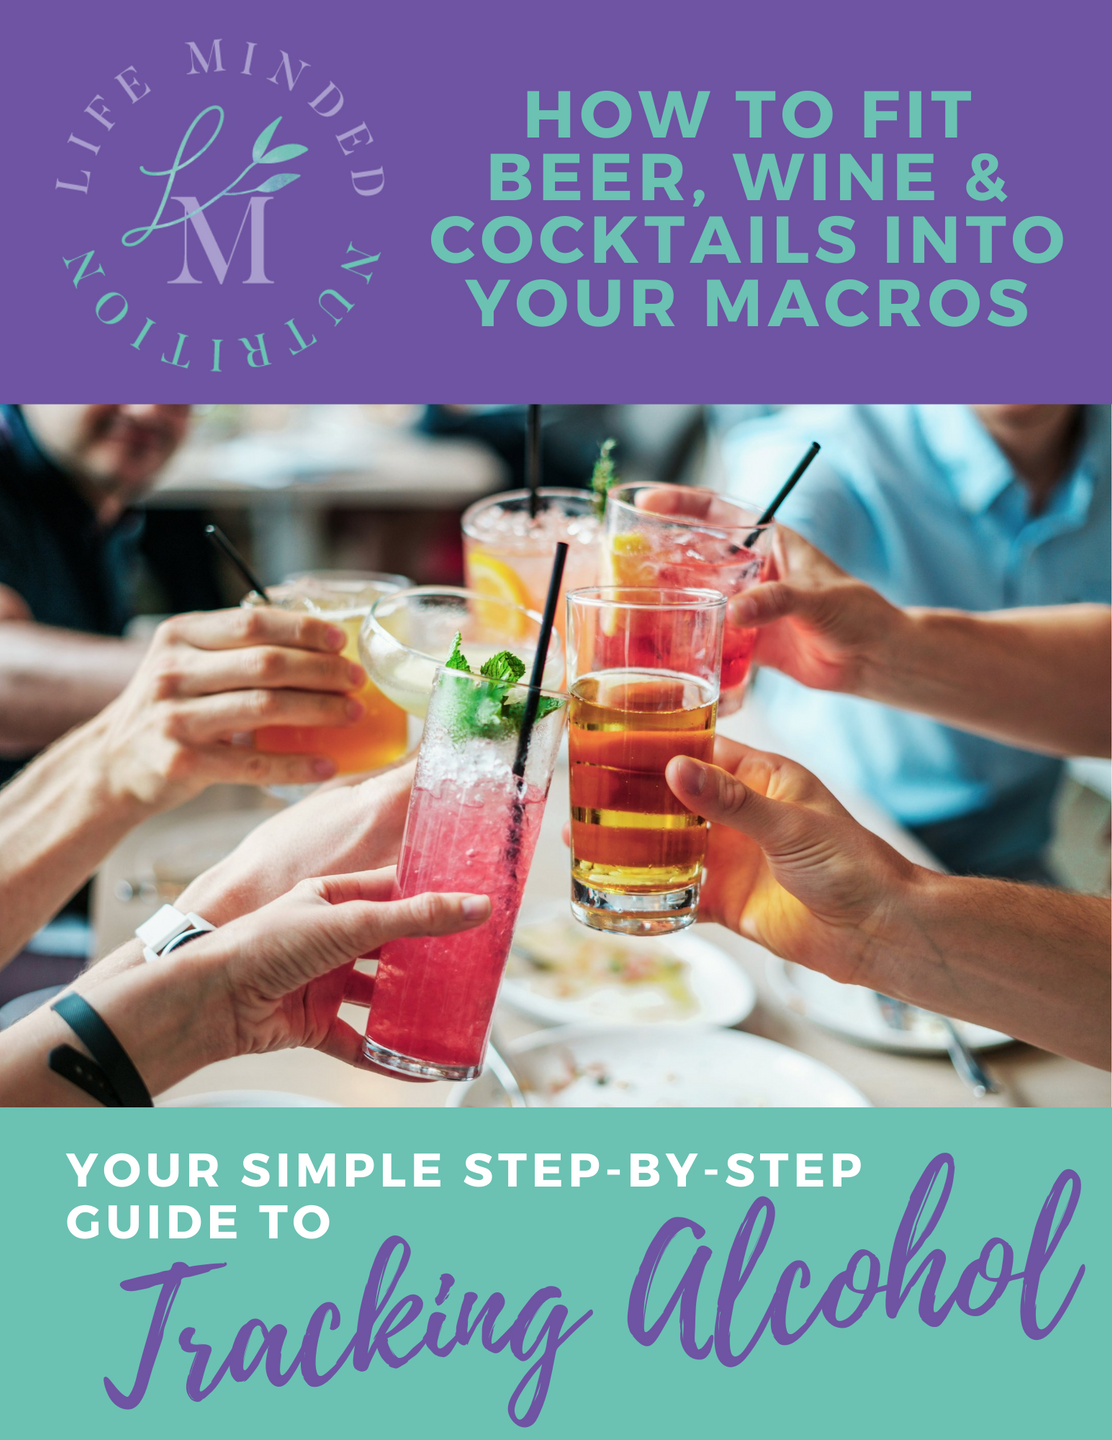 Simple Step-by-Step Guide to Tracking Alcohol